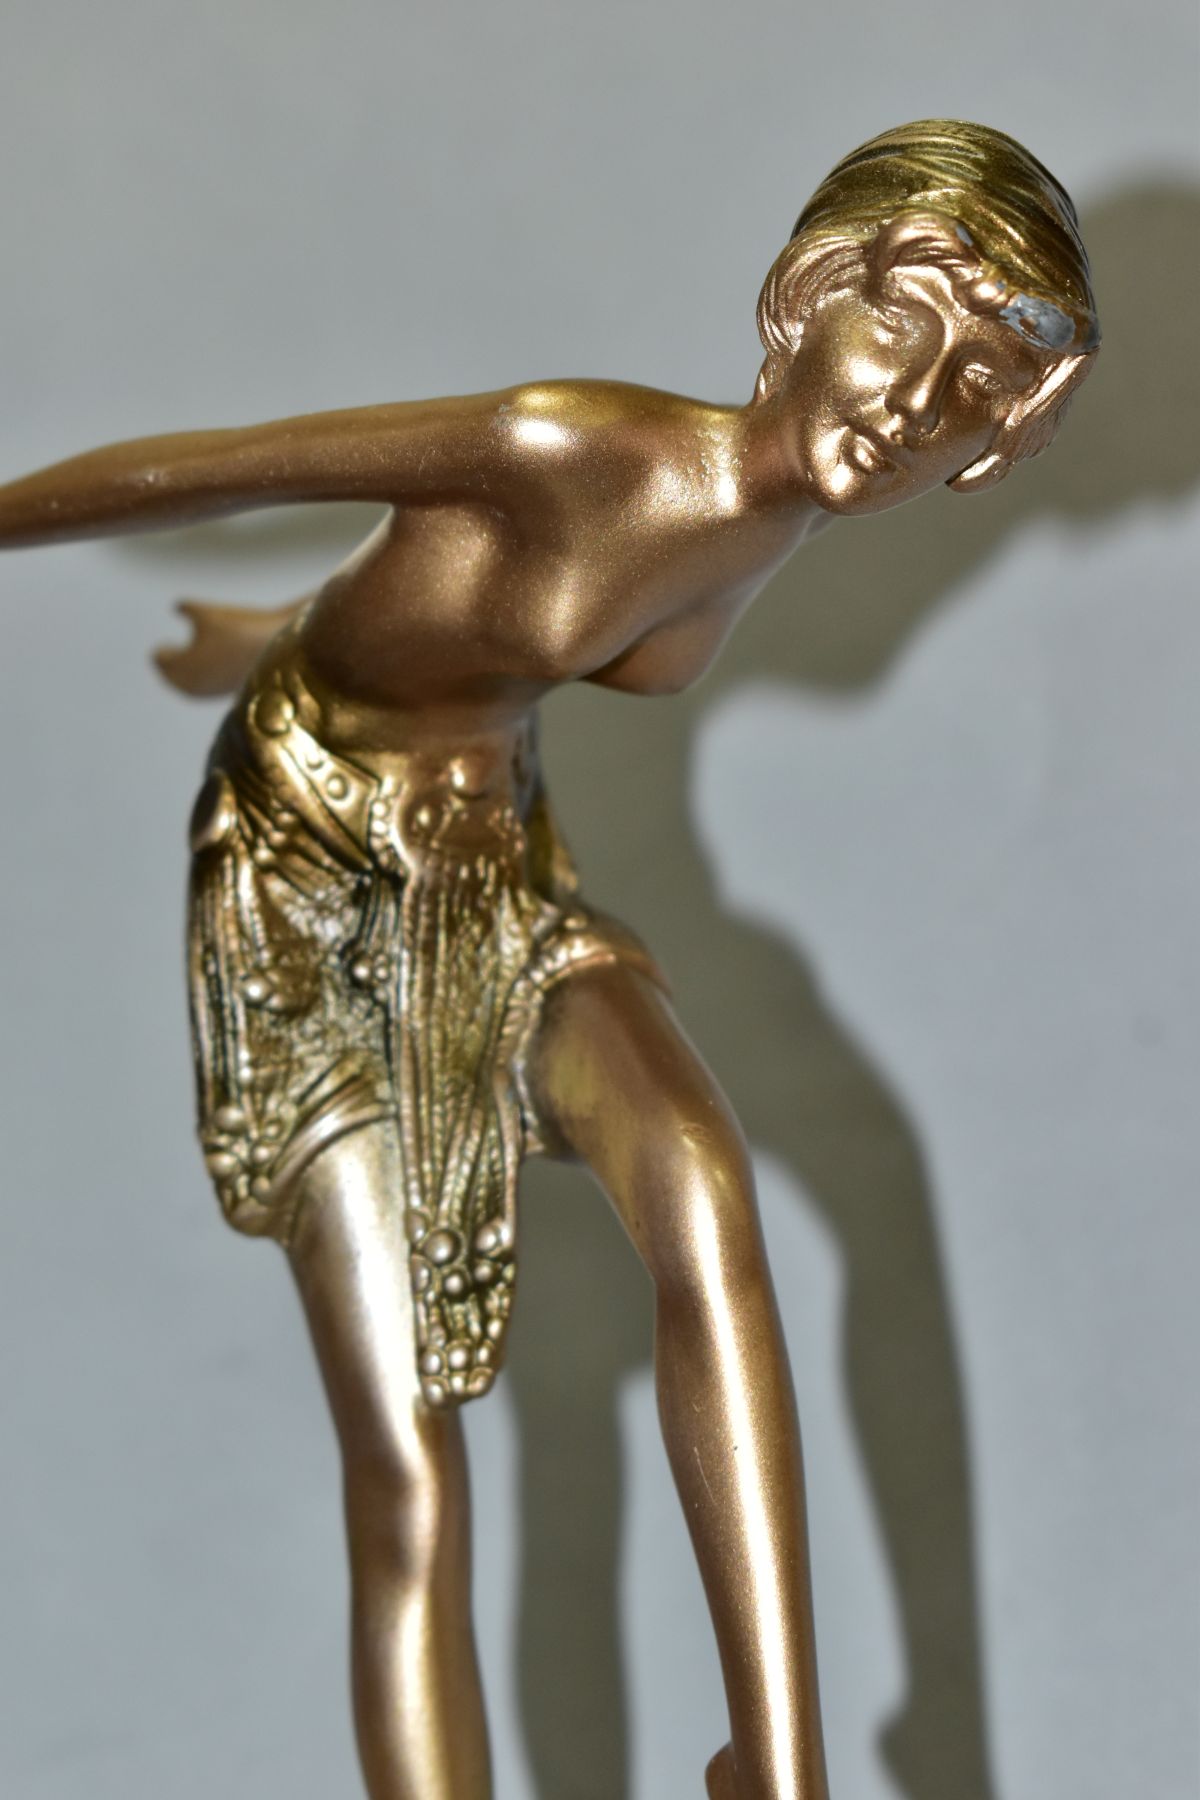 ART DECO STYLE FIGURINES, comprising a bronzed metal scantilly clad female on an onyx plinth, - Image 3 of 11